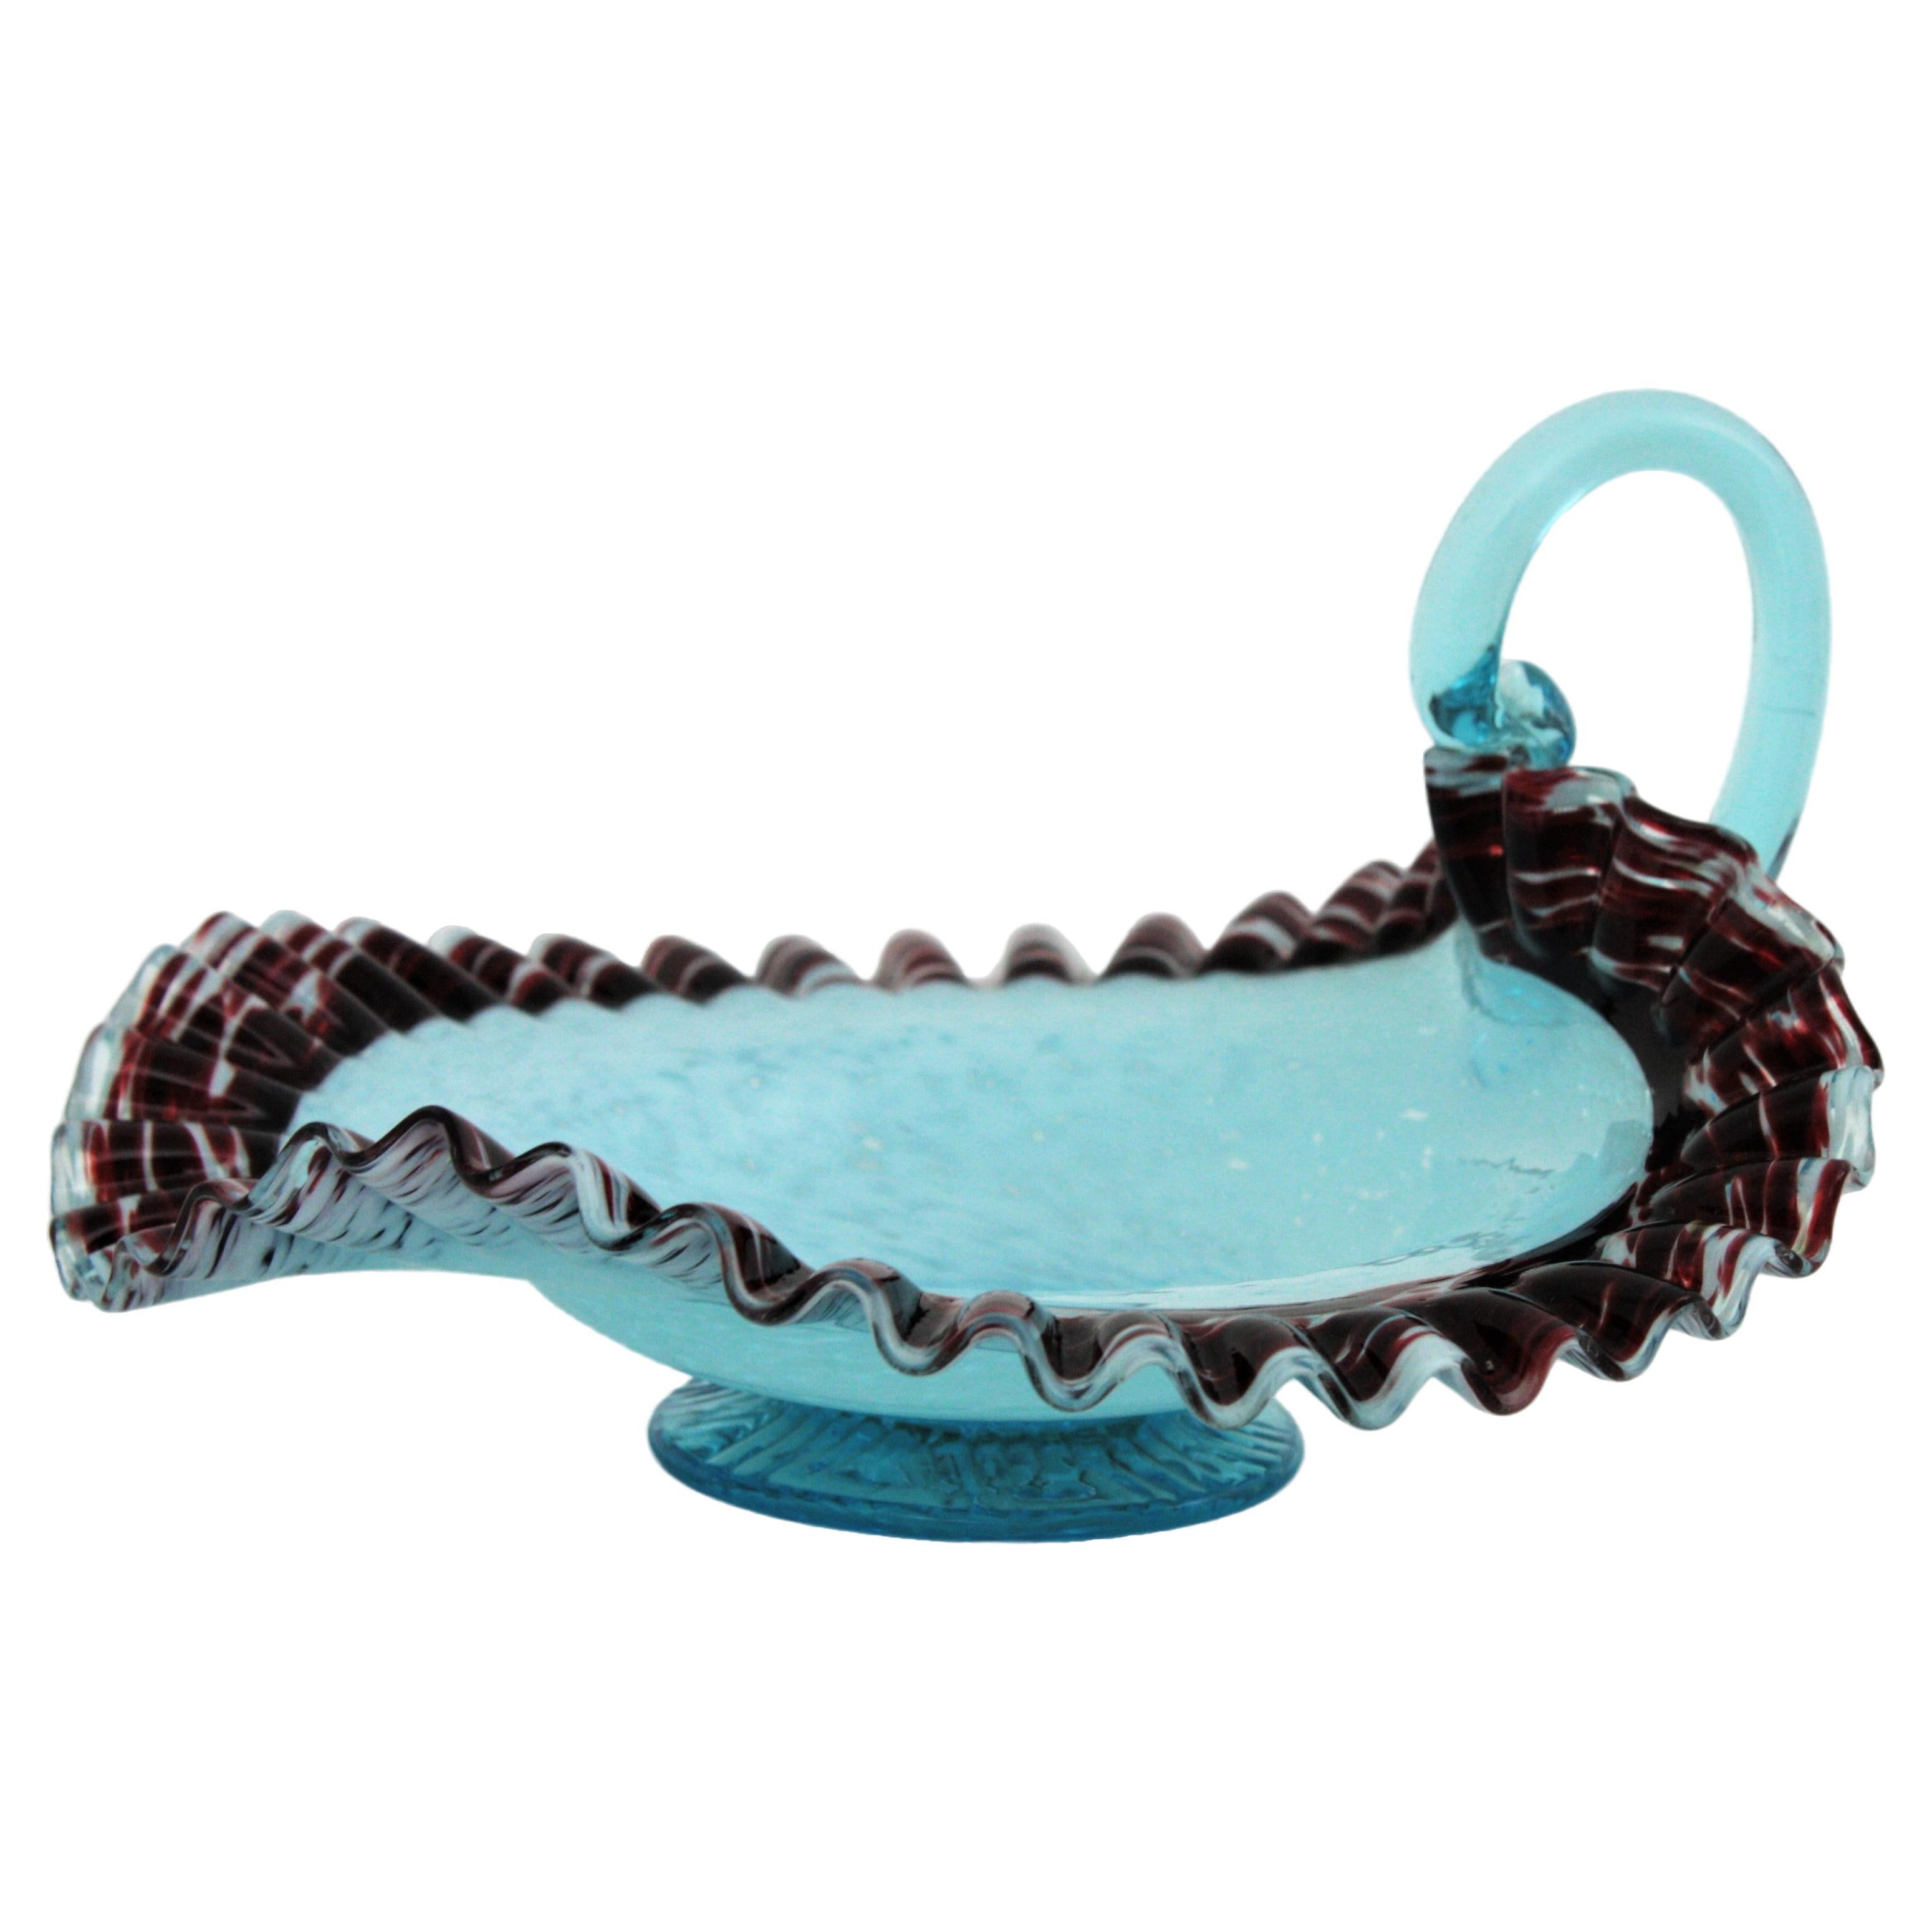 Elegant hand blown Victorian style crimped and ruffled Murano glass footed candy dish / bowl in blue and garnet, Italy, 19th century.
This exquisite footed glass bowl has a background with shades from white to light blue and a wonderful crimped and